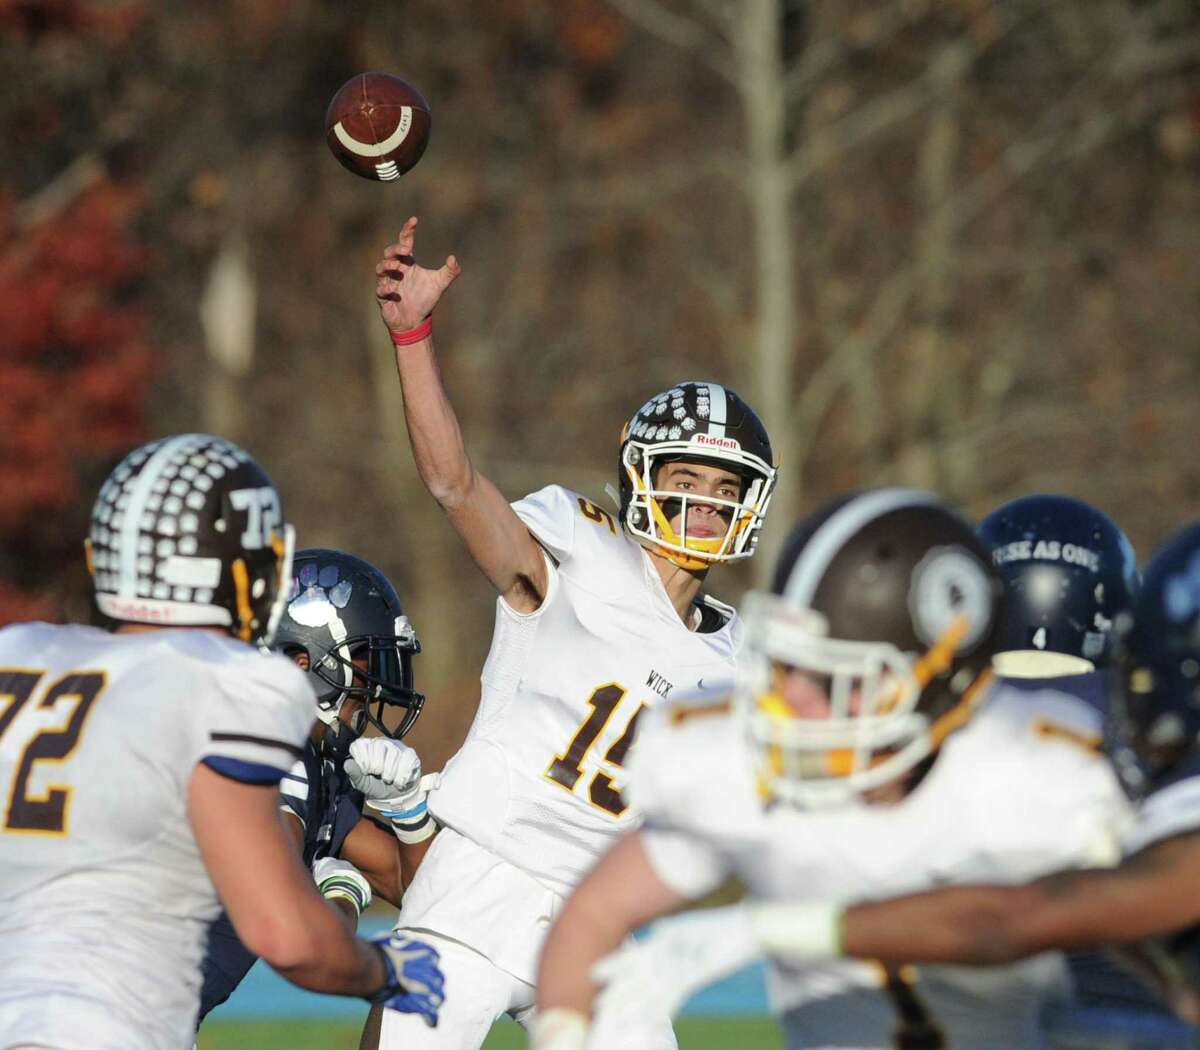 Brunswick quarterback Nick Henkel throws a pass against Cheshire Academy during last year during the Wayne Sanborn Bowl championship game against Cheshire Academy. Cheshire Academy won 45-20. The two teams will meet again tonight in Greenwich.